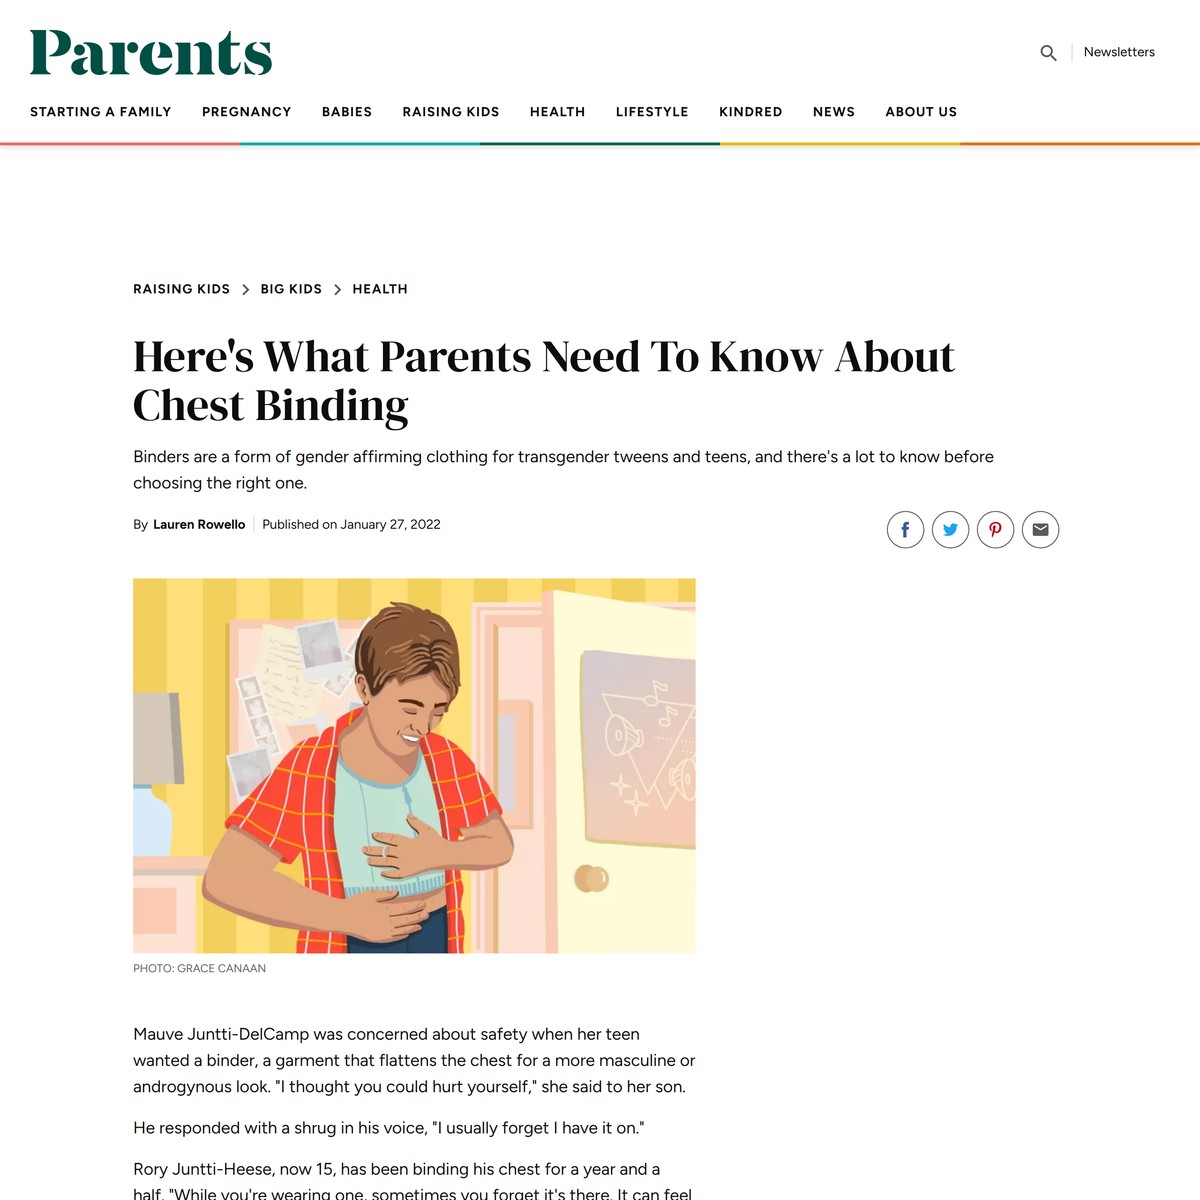 Here's What Parents Need To Know About Chest Binding